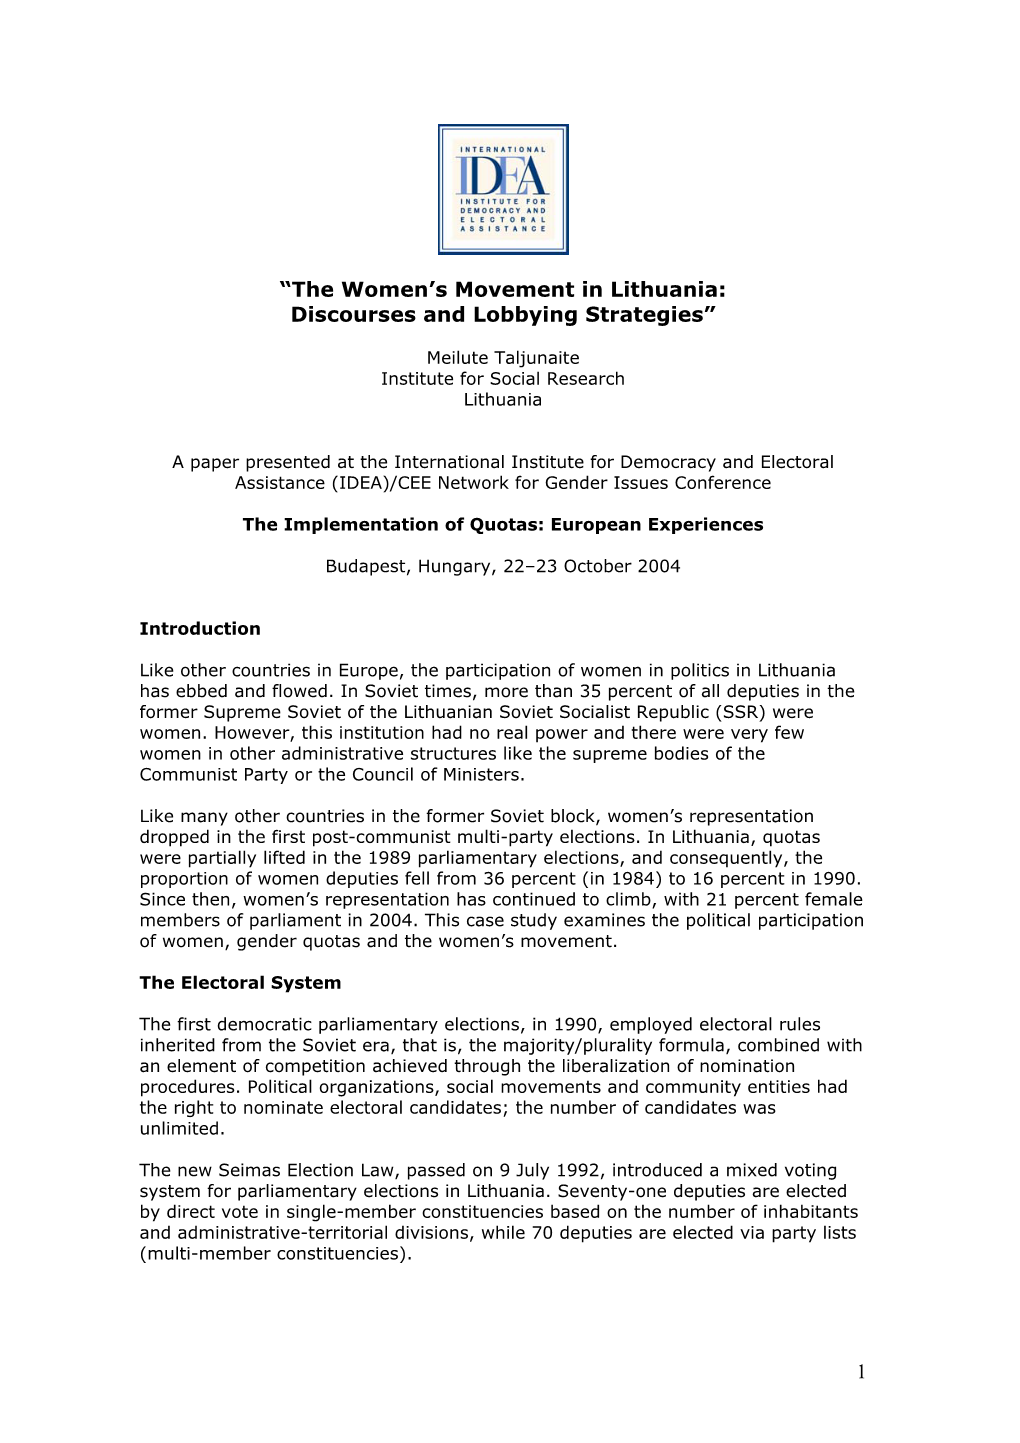 The Women's Movement in Lithuania: Discourses and Lobbying Strategies